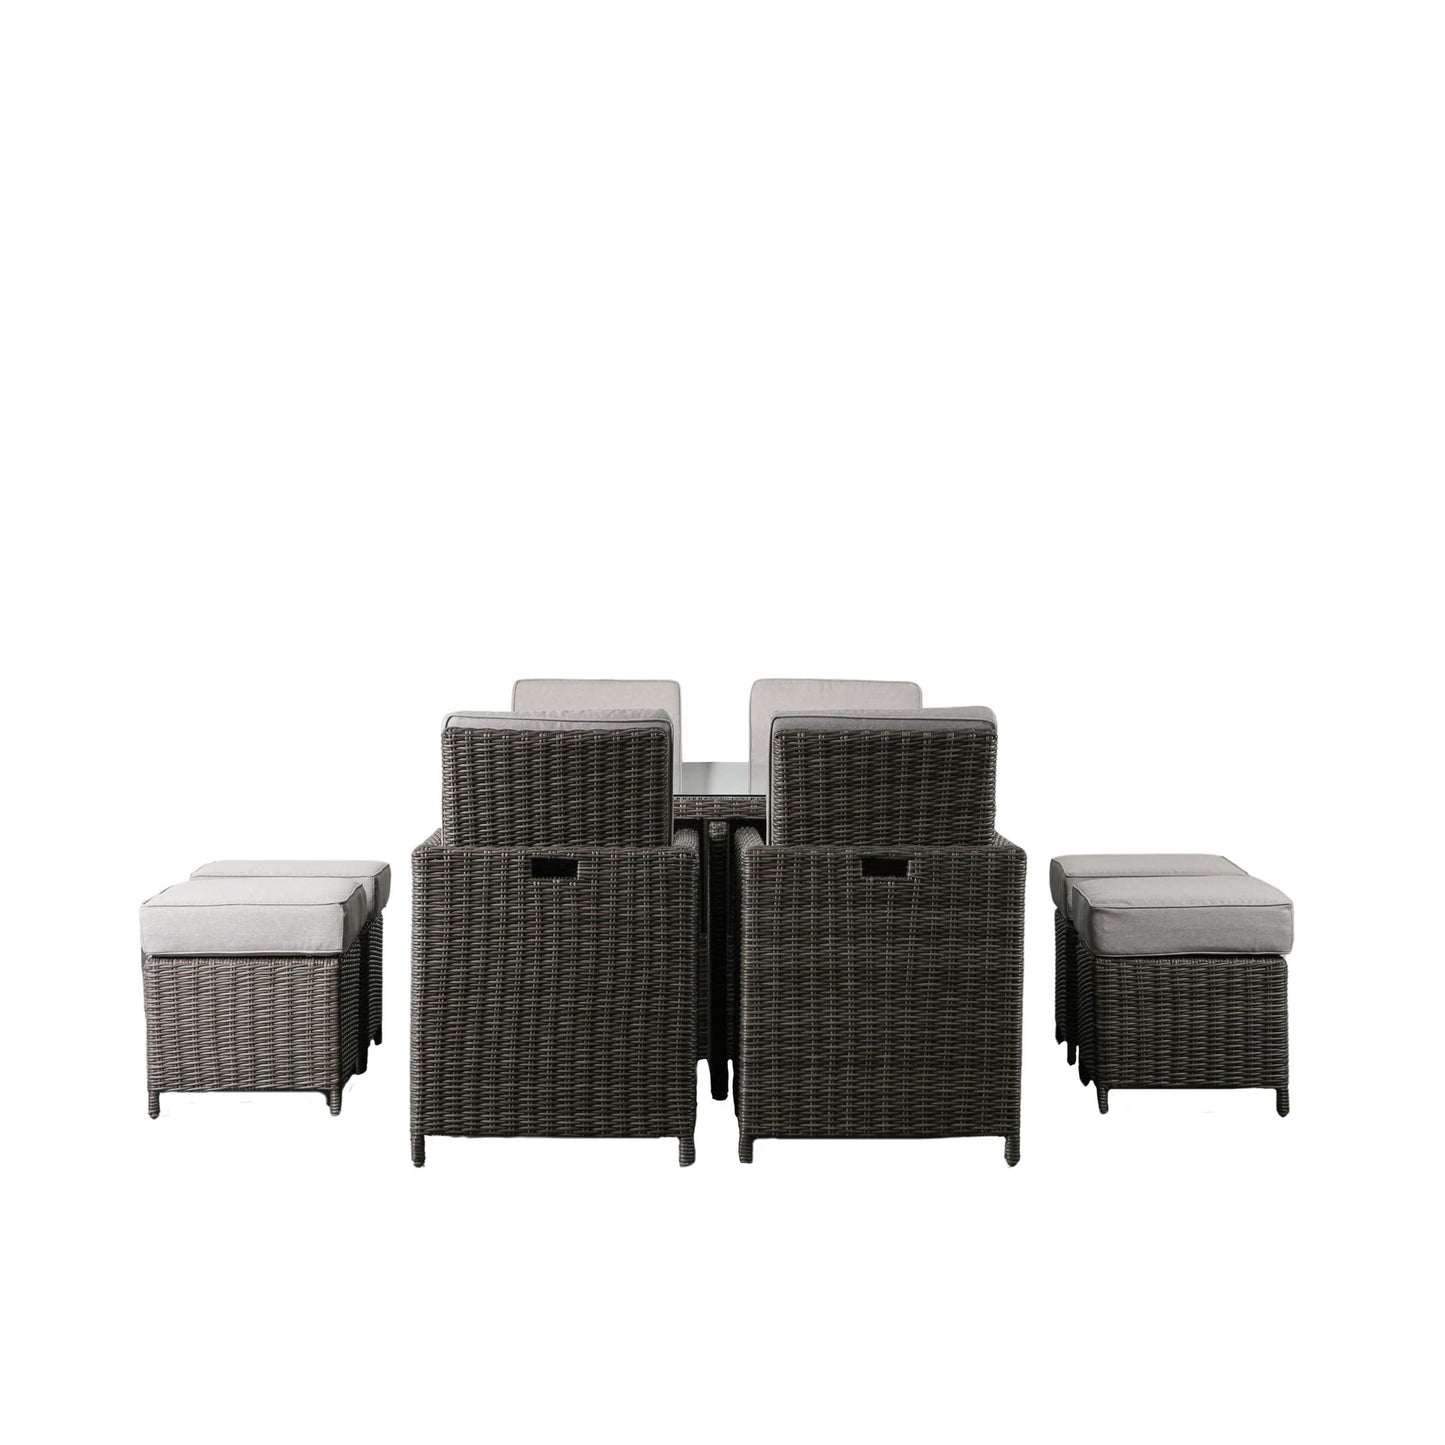 Rondin 8 Seater Cube Dining Set - Colour Options